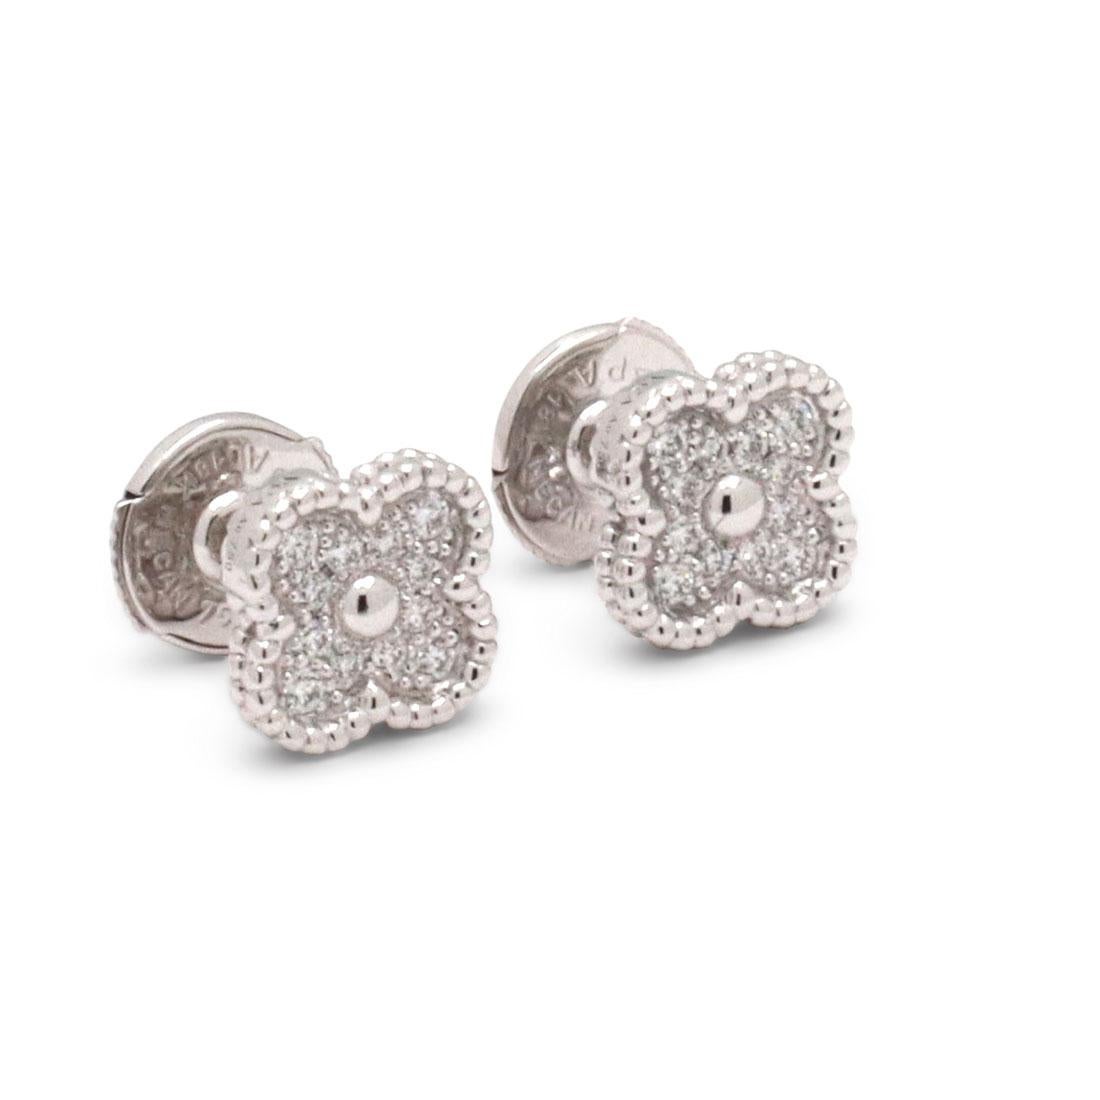 Authentic Van Cleef & Arpels 'Sweet Alhambra' earrings crafted in 18 karat white gold centering on a clover motif set with an estimated 0.16 carats total of round brilliant cut diamonds (E-F color, VS clarity). Signed VCA, Au750, with serial number